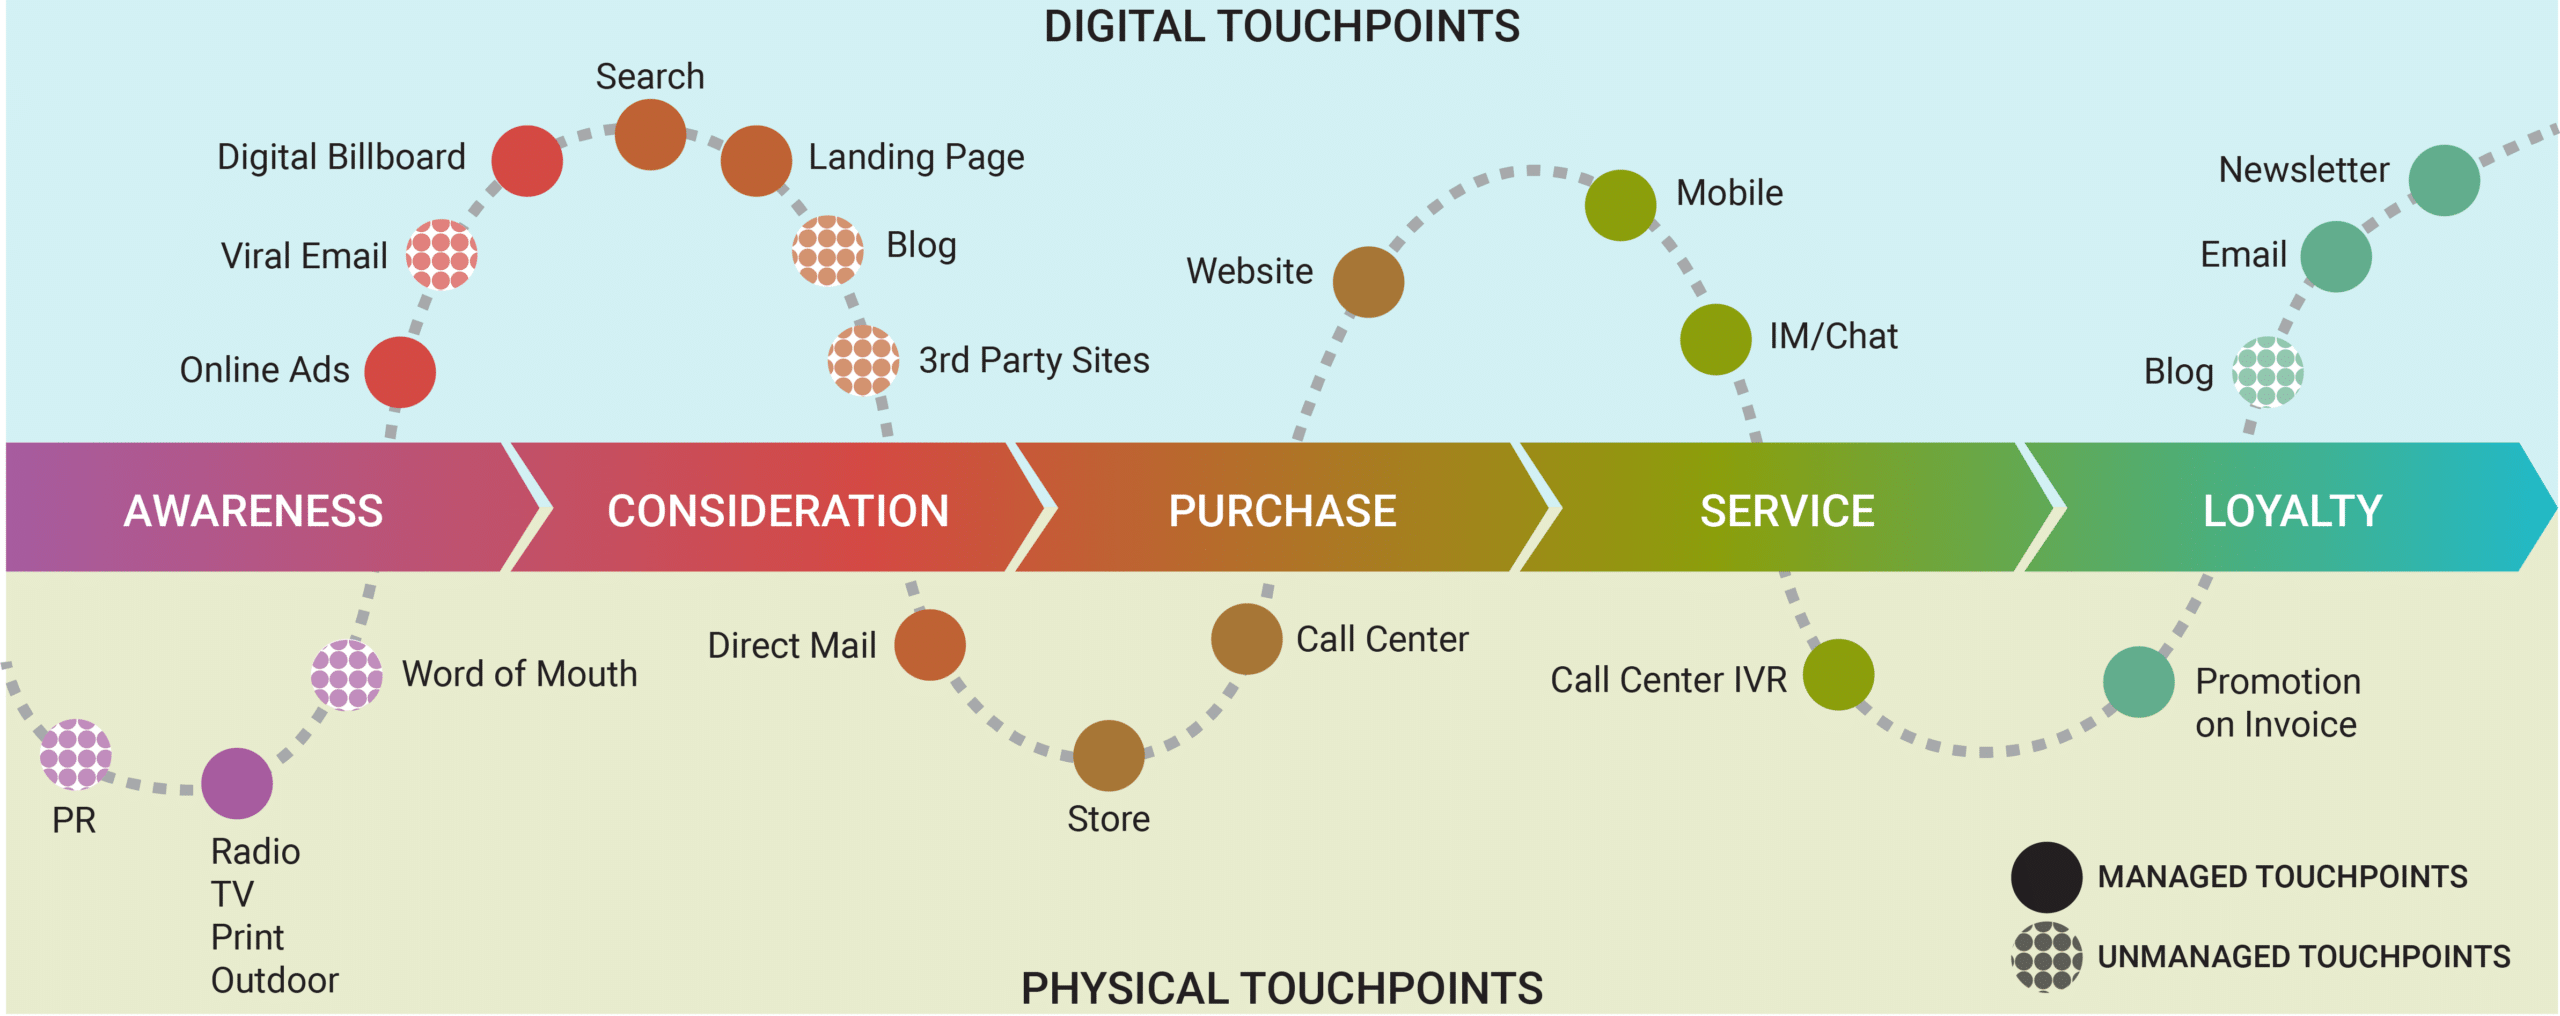 Overview Digital and Physical Touchpoints